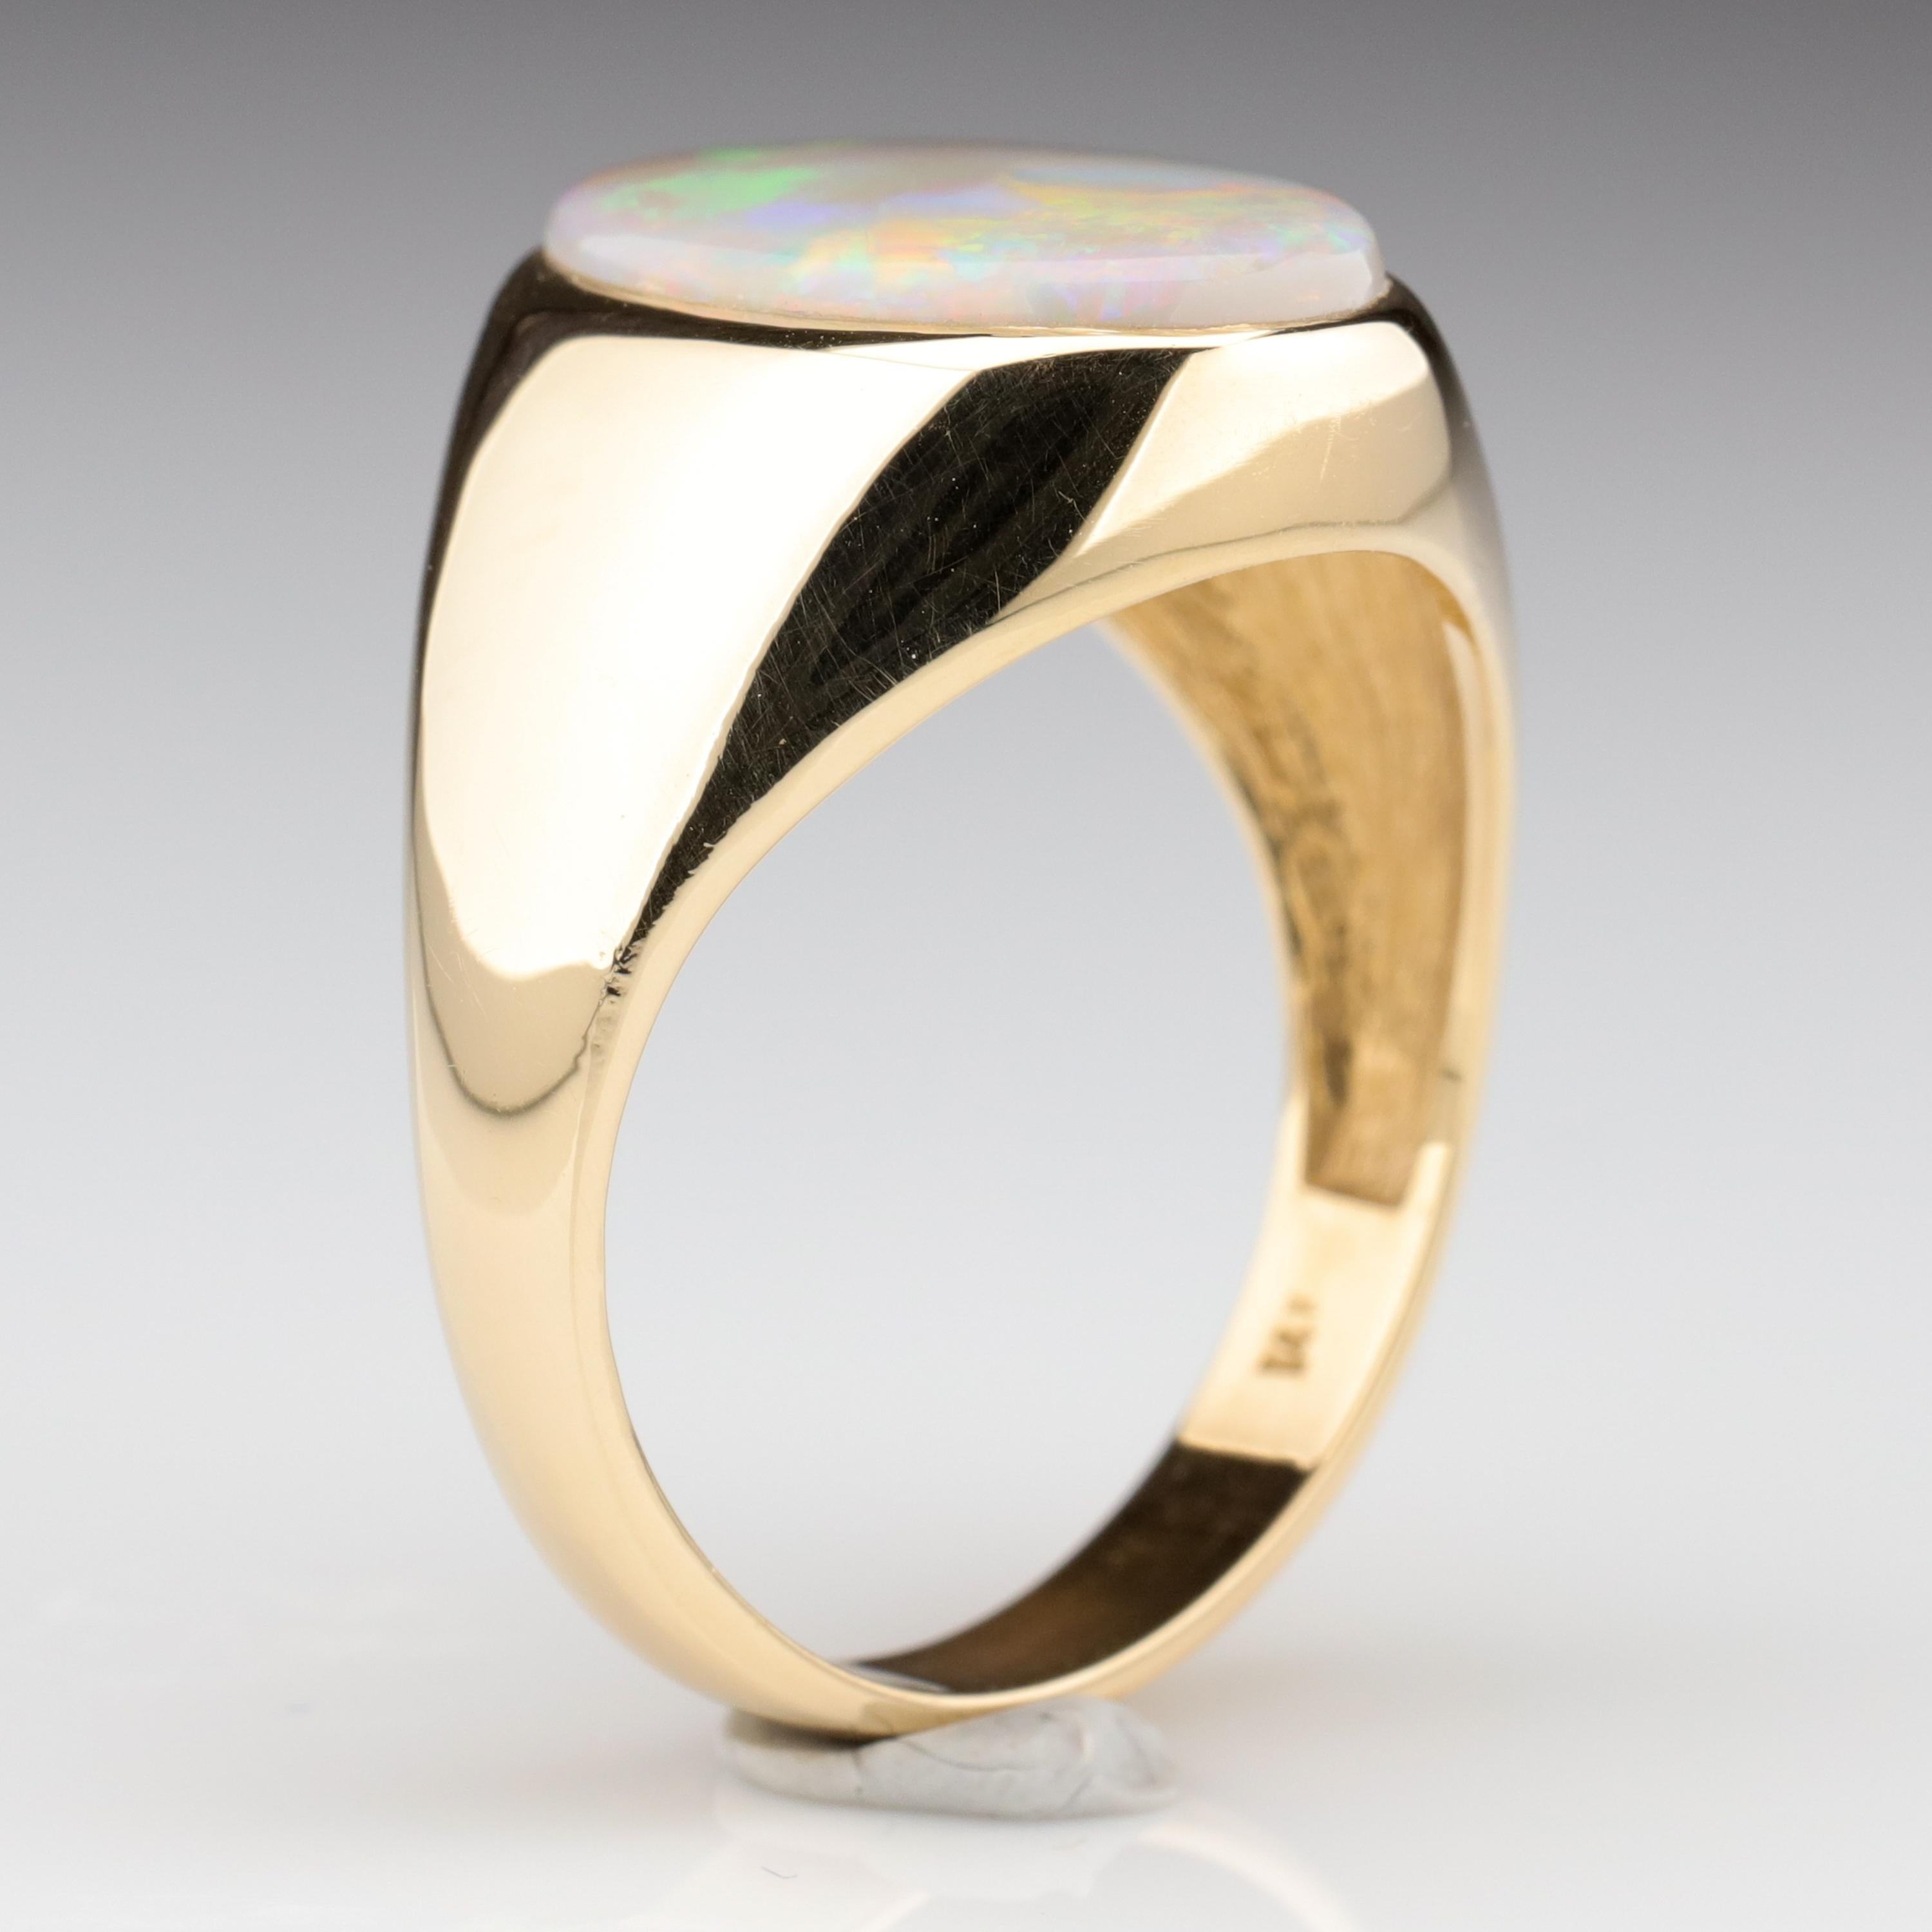 Cabochon Men's Australian White Opal Ring with Full Spectrum Broad Flash